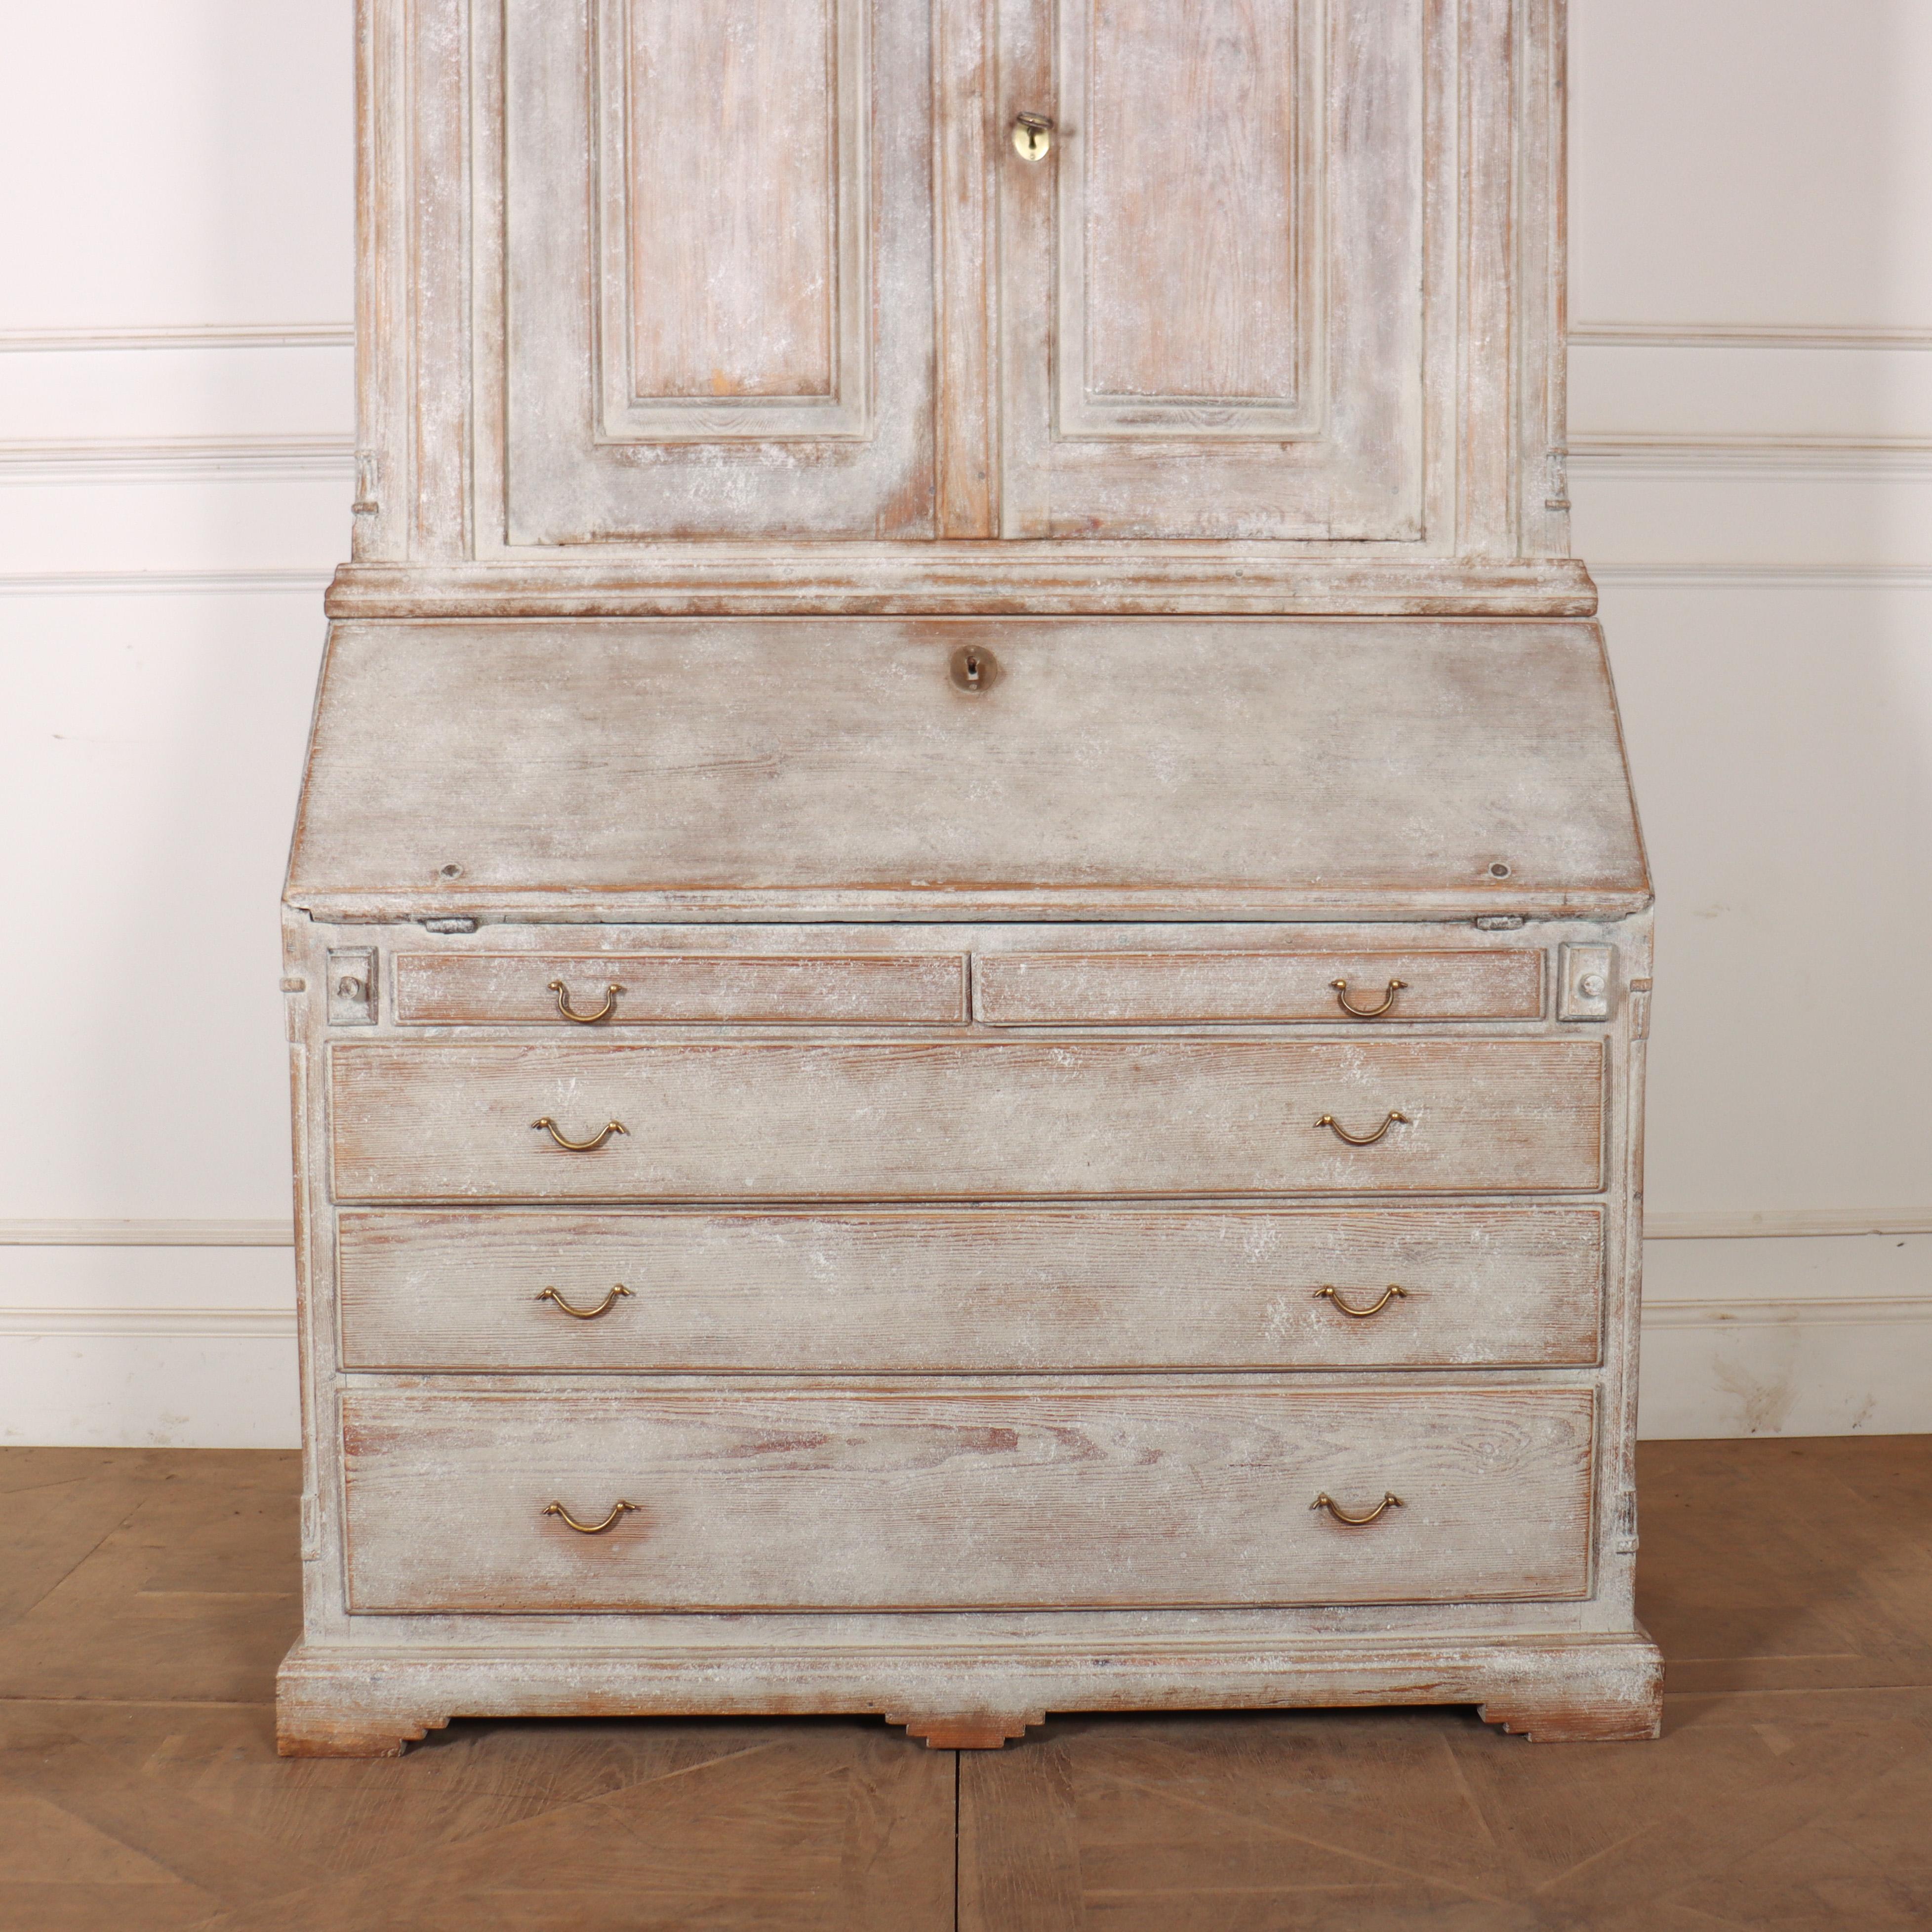 19th C Swedish pine bureau bookcase with later paint. 1840.

Reference: 8340

Dimensions
49.5 inches (126 cms) Wide
20.5 inches (52 cms) Deep
79.5 inches (202 cms) High